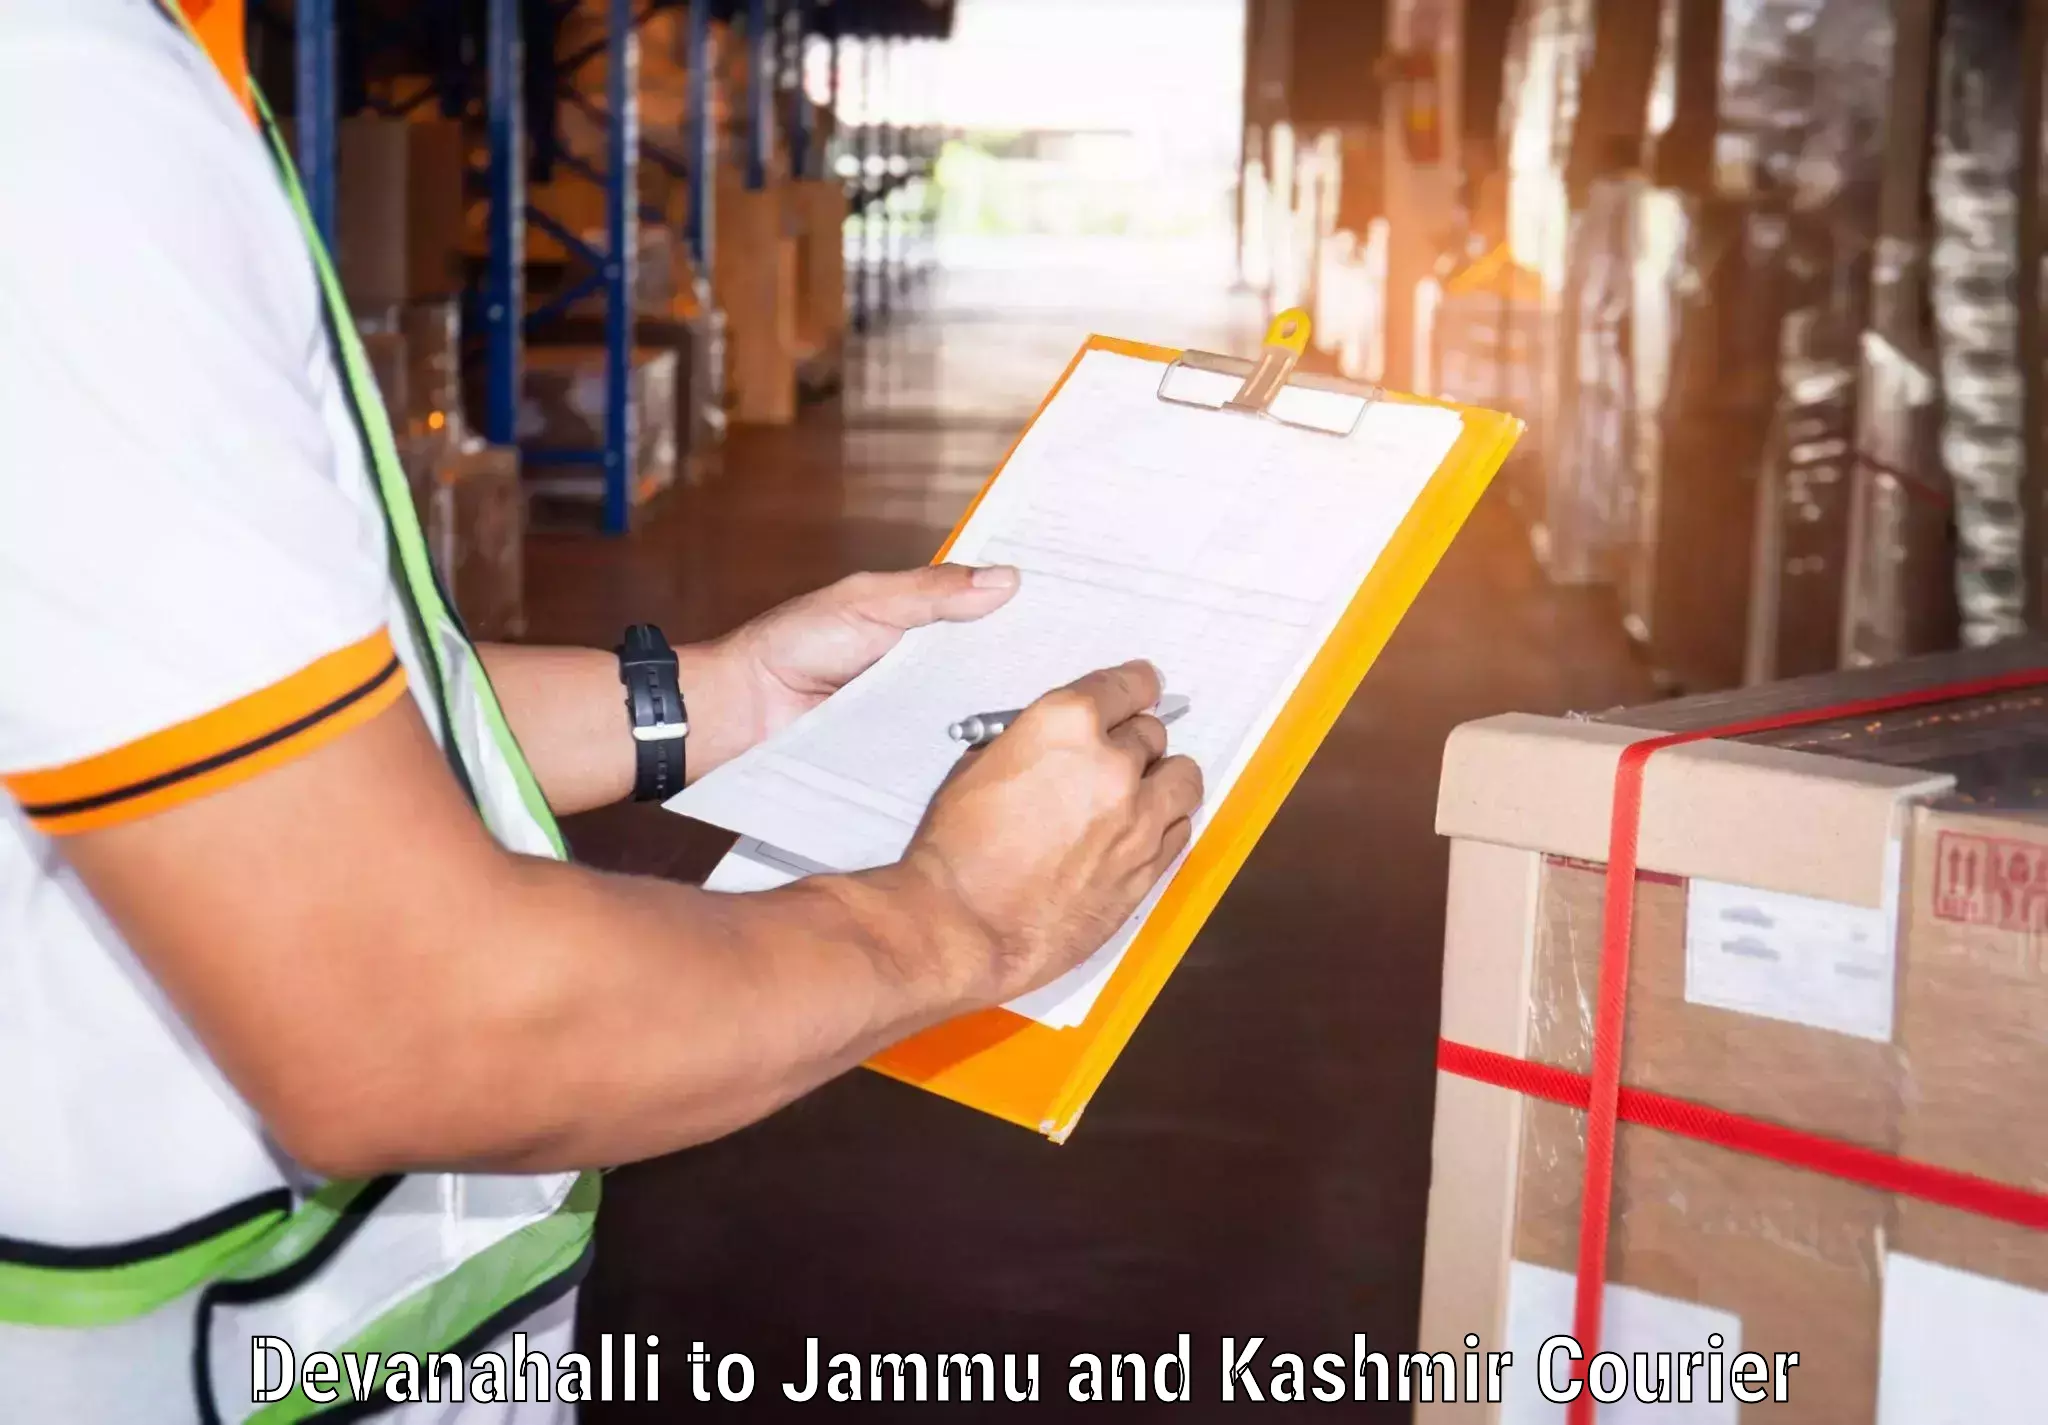 Cargo delivery service Devanahalli to Jammu and Kashmir